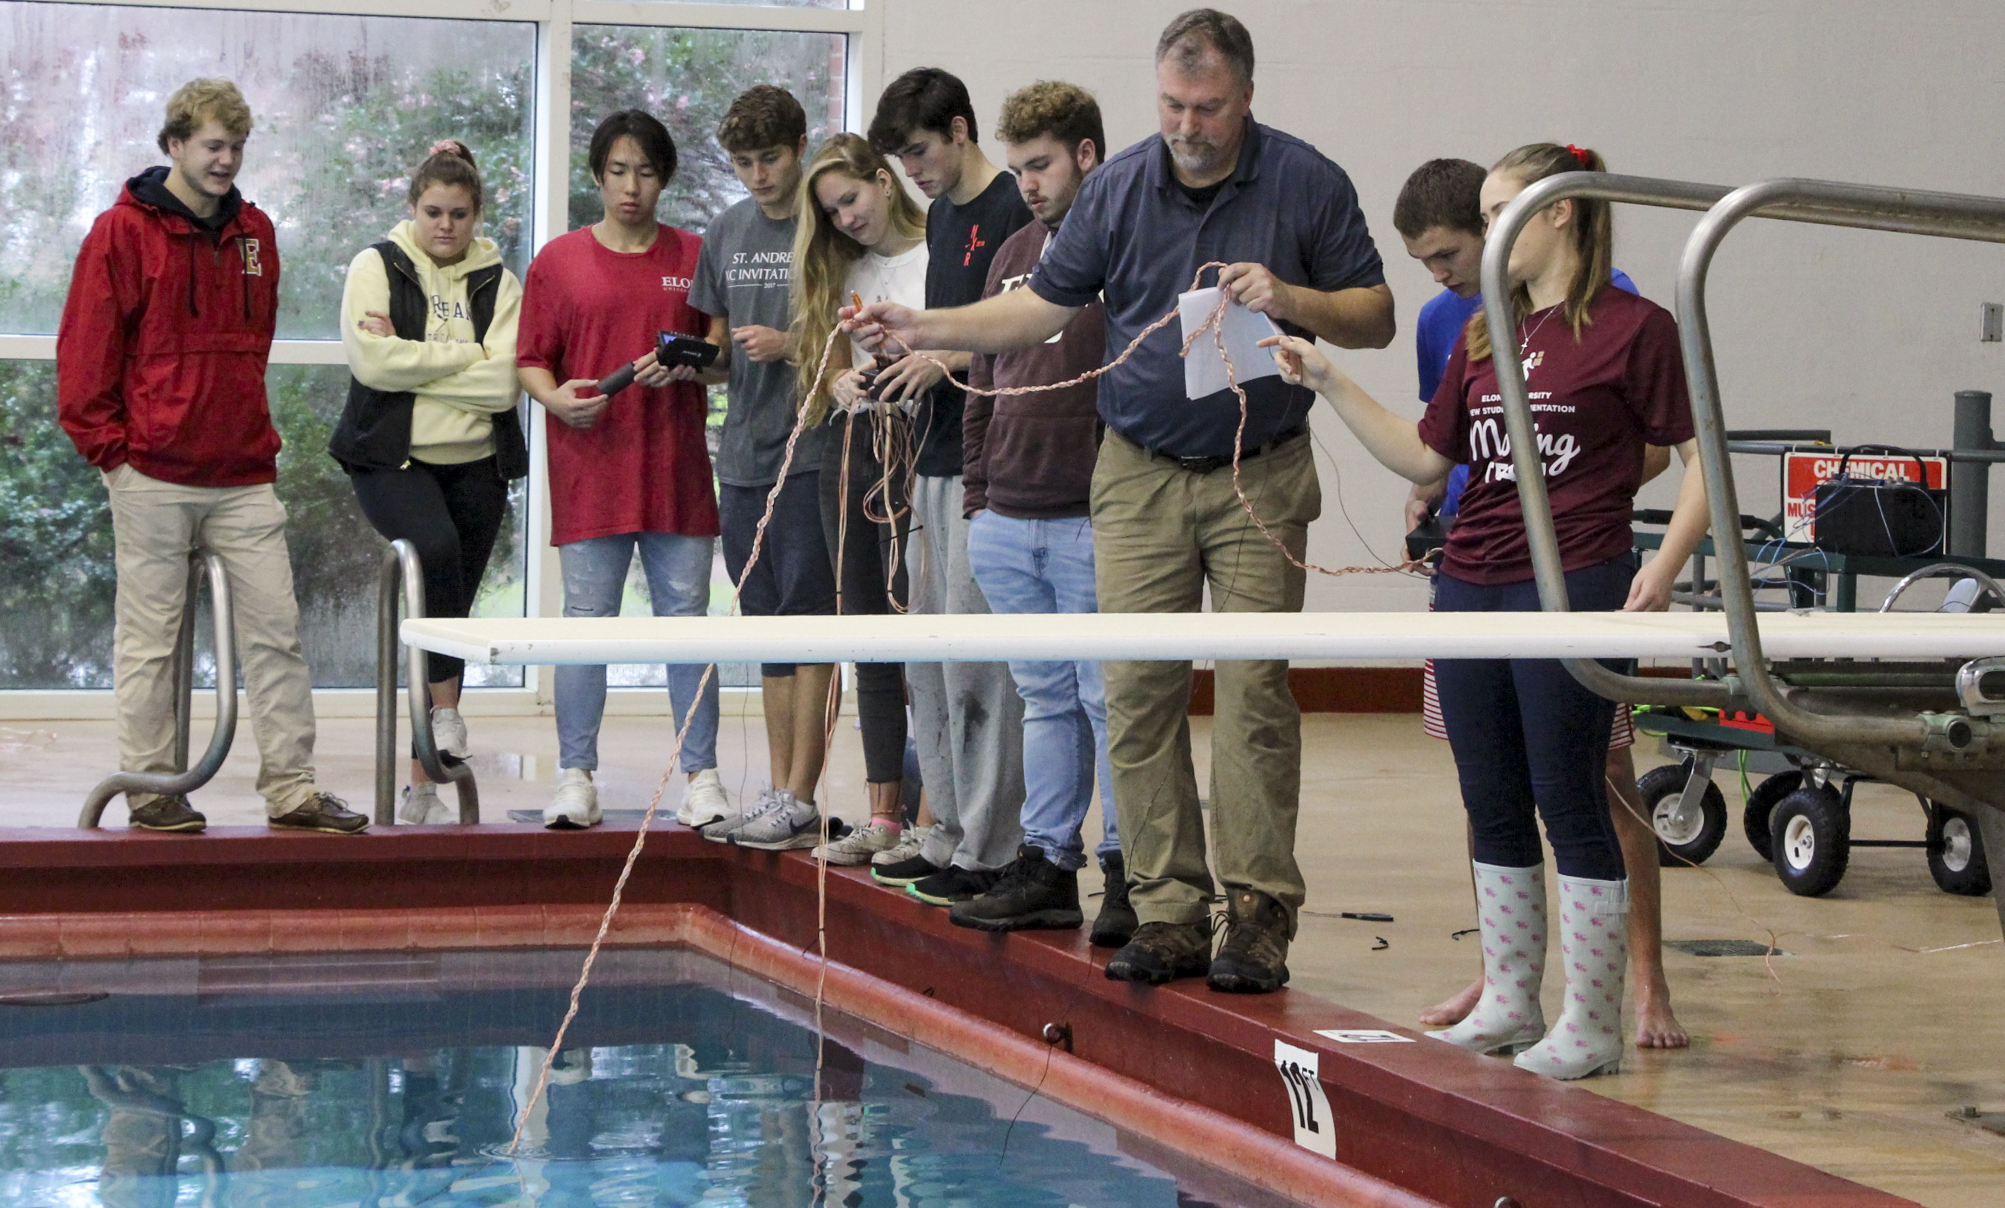 Scott Wolter assists the Grand Challenges in Engineering I class in testing their underwater vehicle designs inside Koury Gym in December 2019.